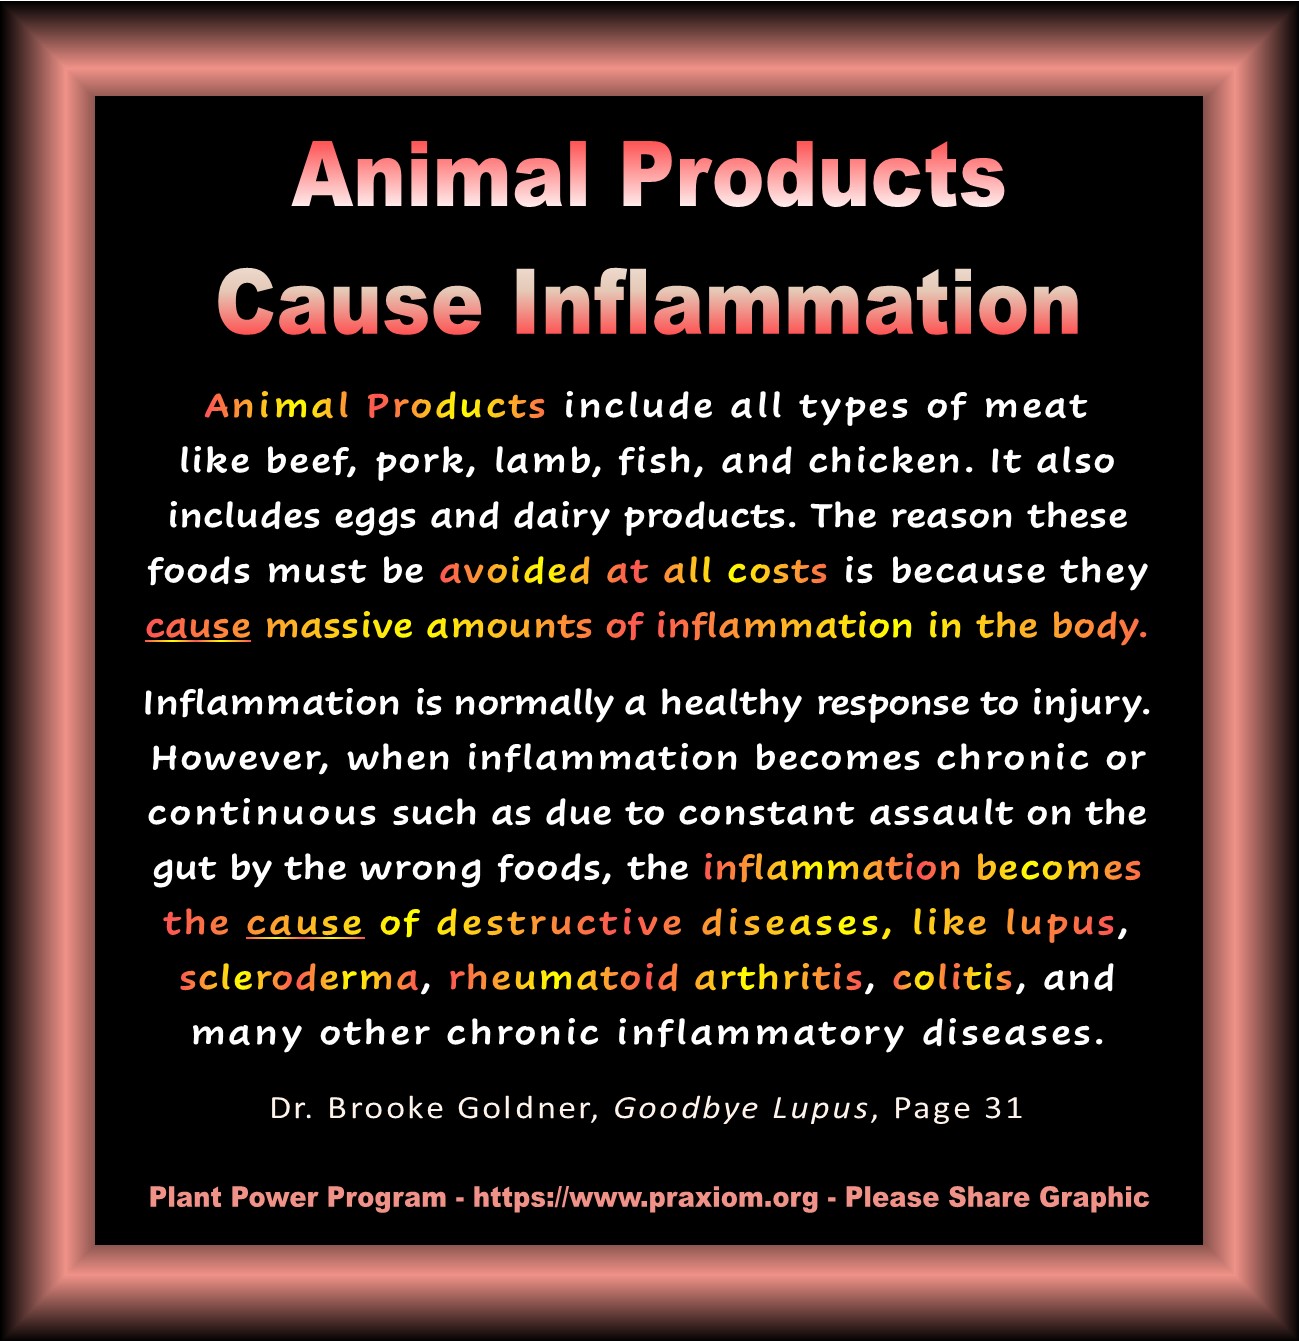 Animal Products Cause Inflammation - Dr. Brooke Goldner